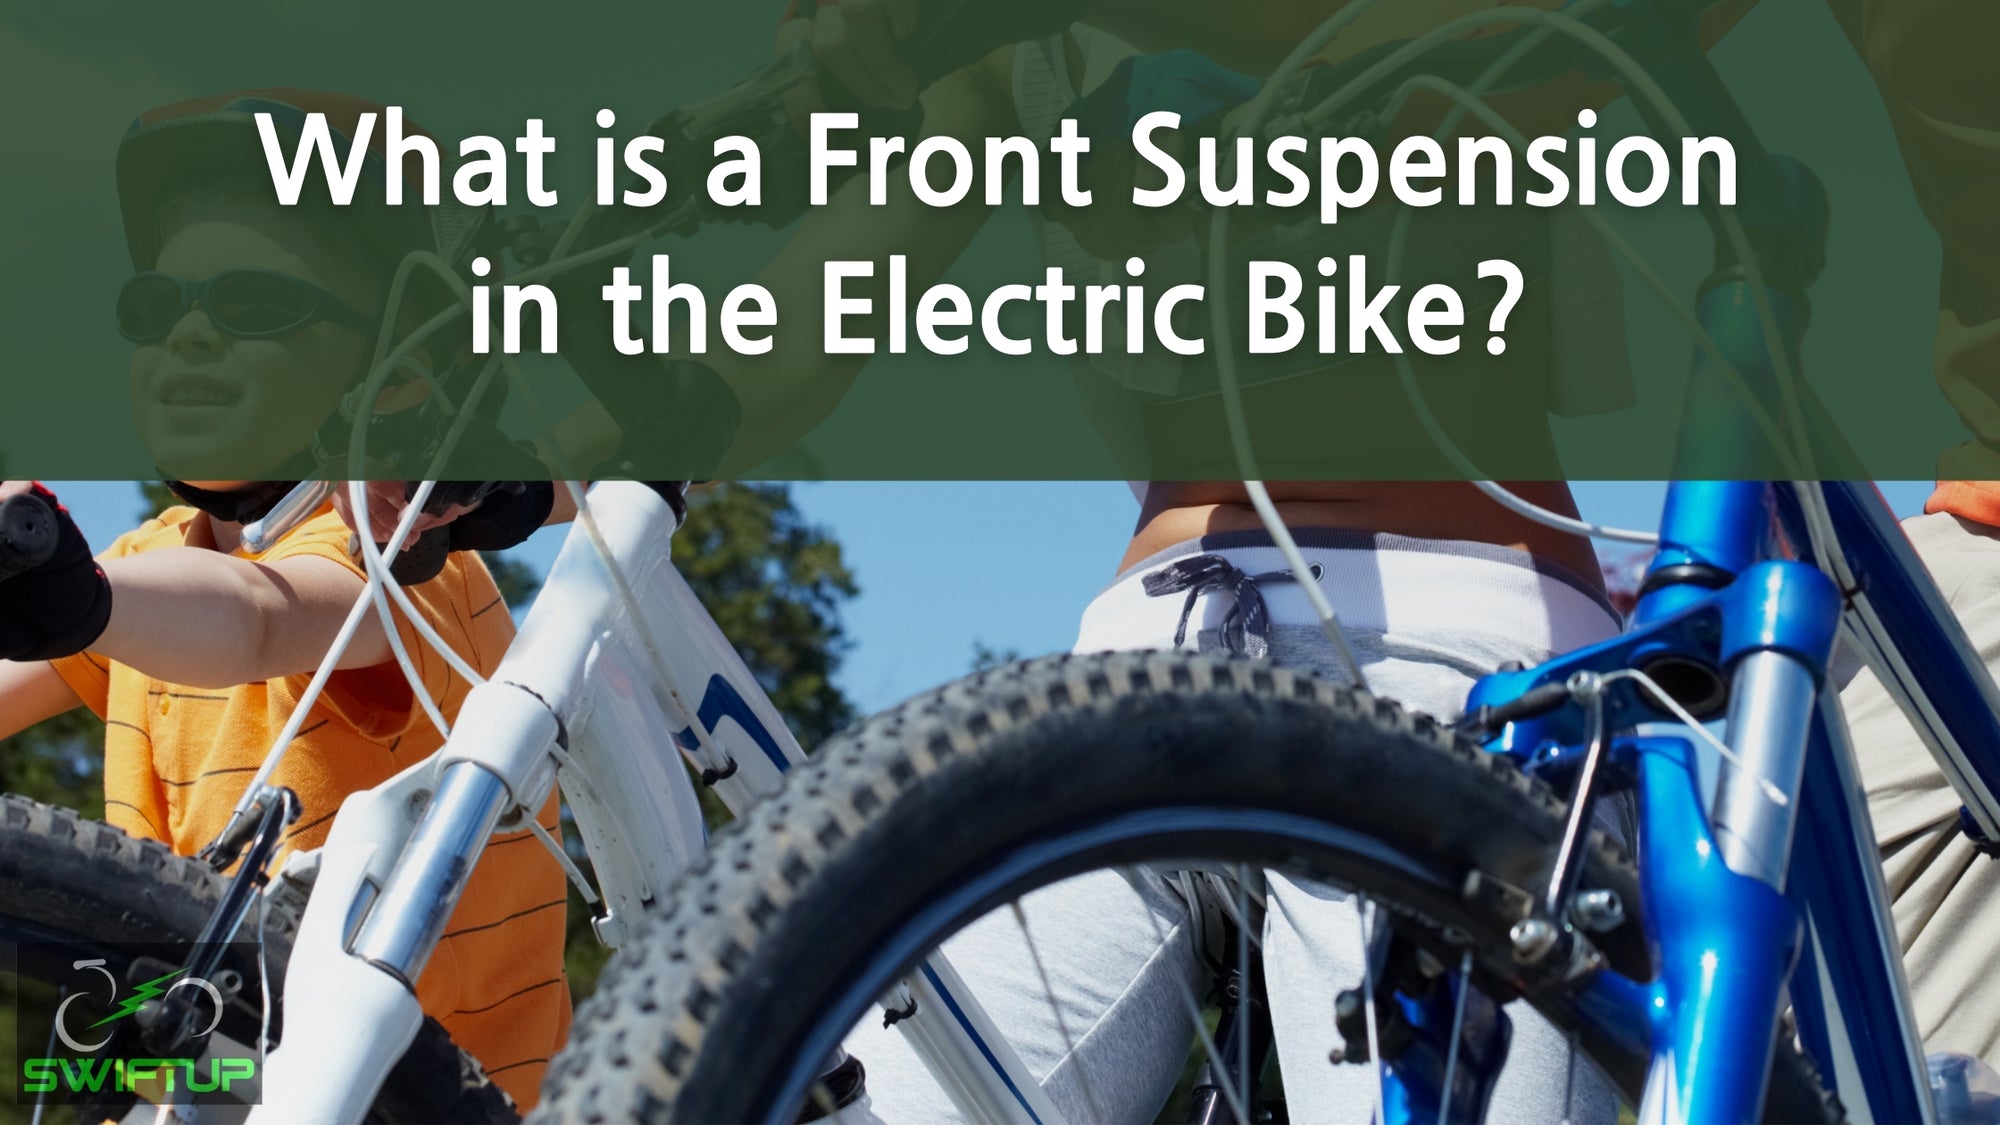 What is a front suspension in electric bike